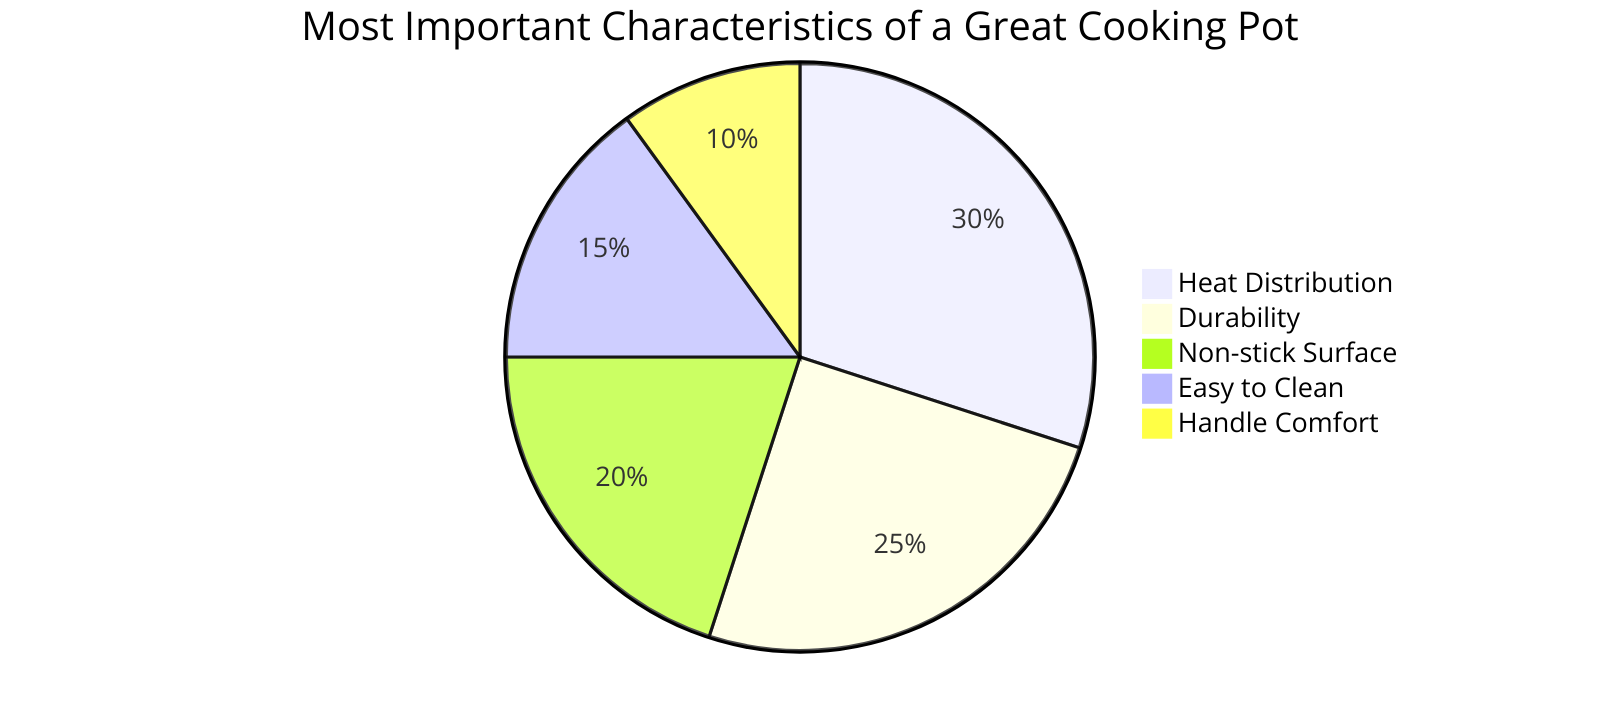 the most important characteristics of a great cooking pot